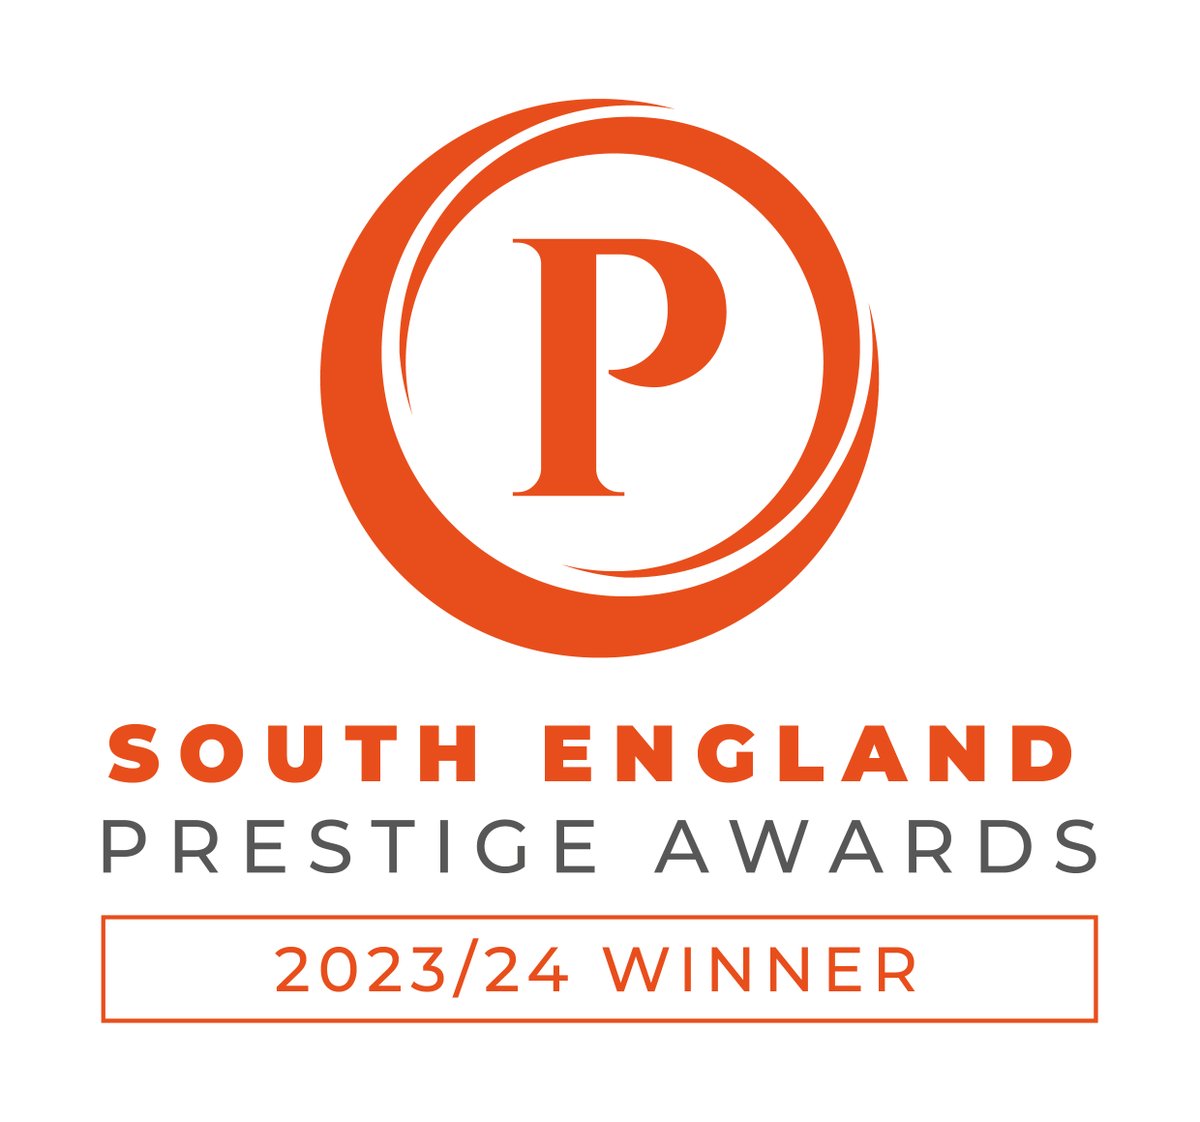 What a thrill to be a winner for the third year running with South England Prestige Awards.  Thank you so much to everyone involved!

#AwardWinners #PrestigeAwards #AthenaCollections